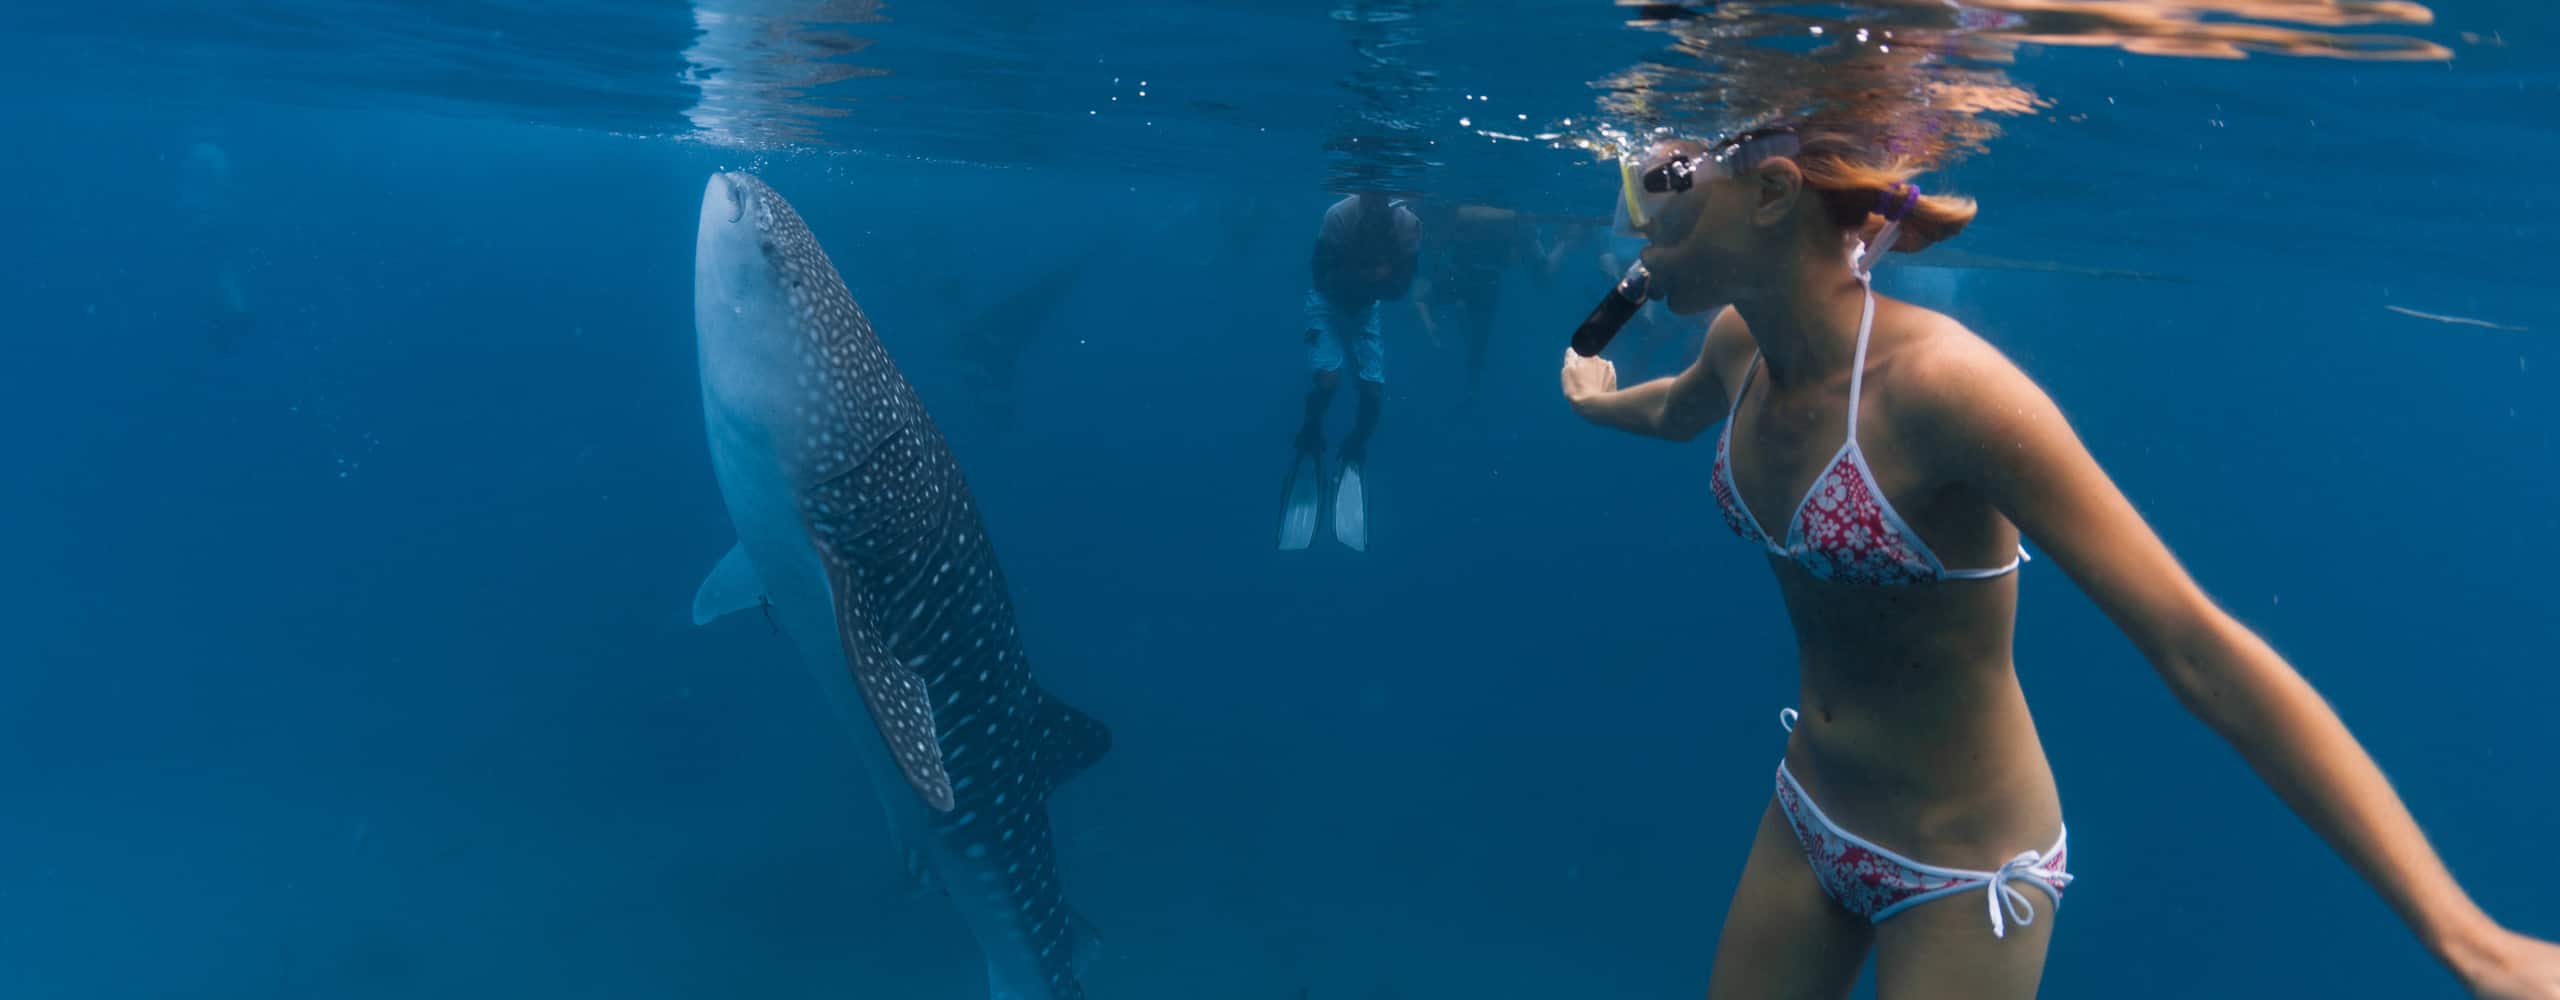 Snorkelling With Whale Sharks In Oslob, Philippines